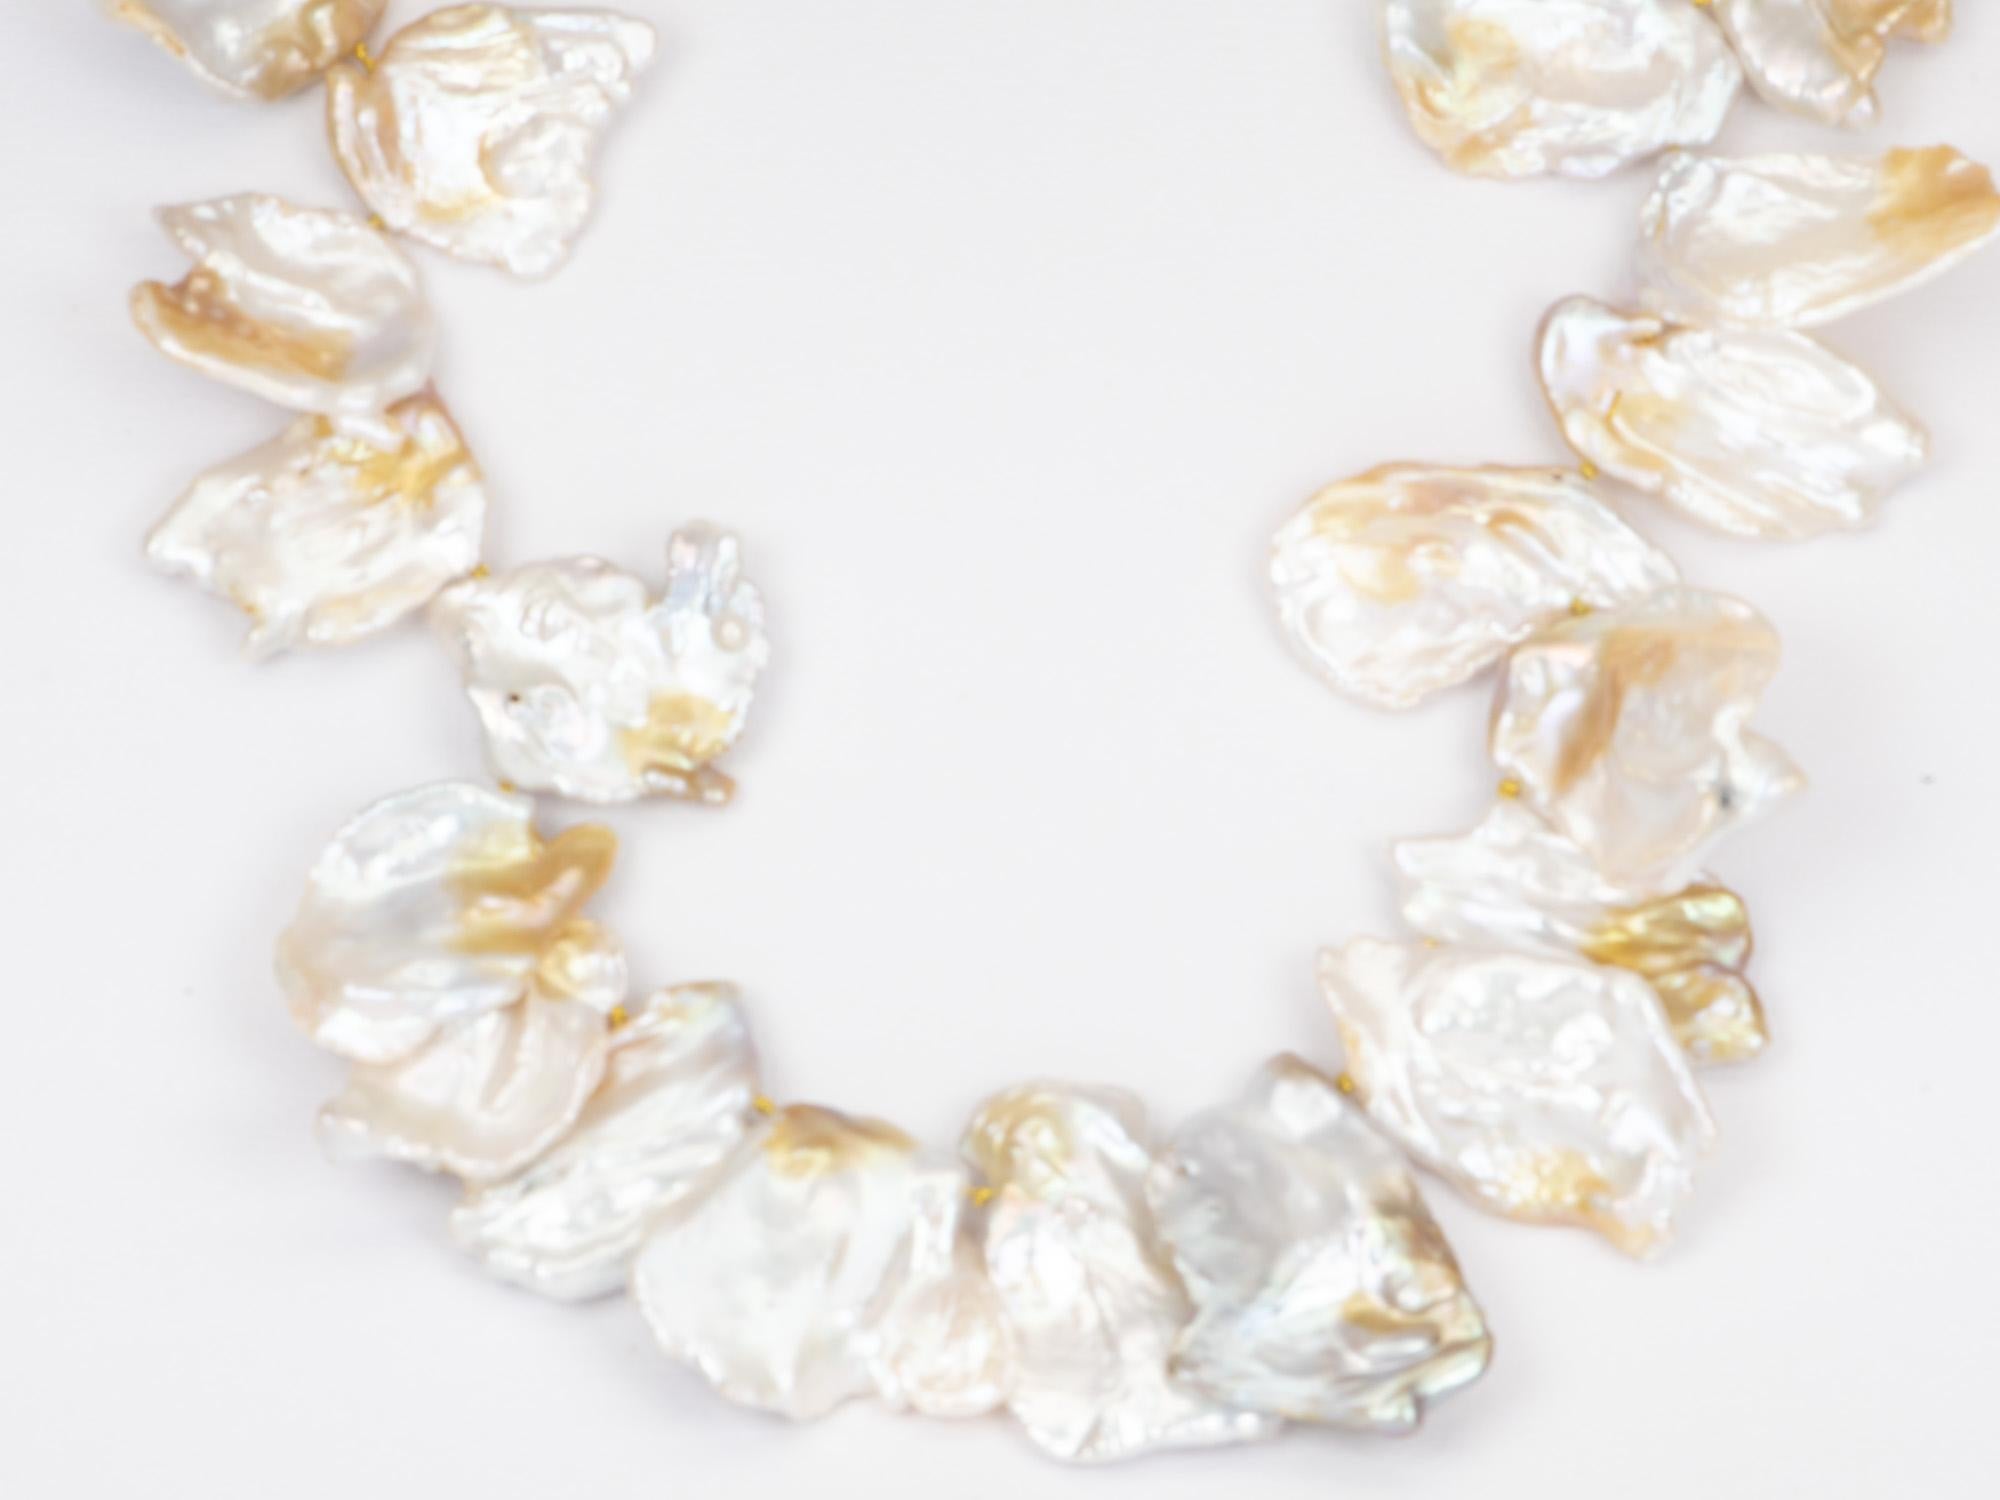 ♥ This is a beautiful necklace strung with large petal pearls with a 14k gold sailor clasp
♥ The pearls are very large, with the largest measuring more than 35mm long. These pearls are extra specially as each pearl is naturally infused with a small